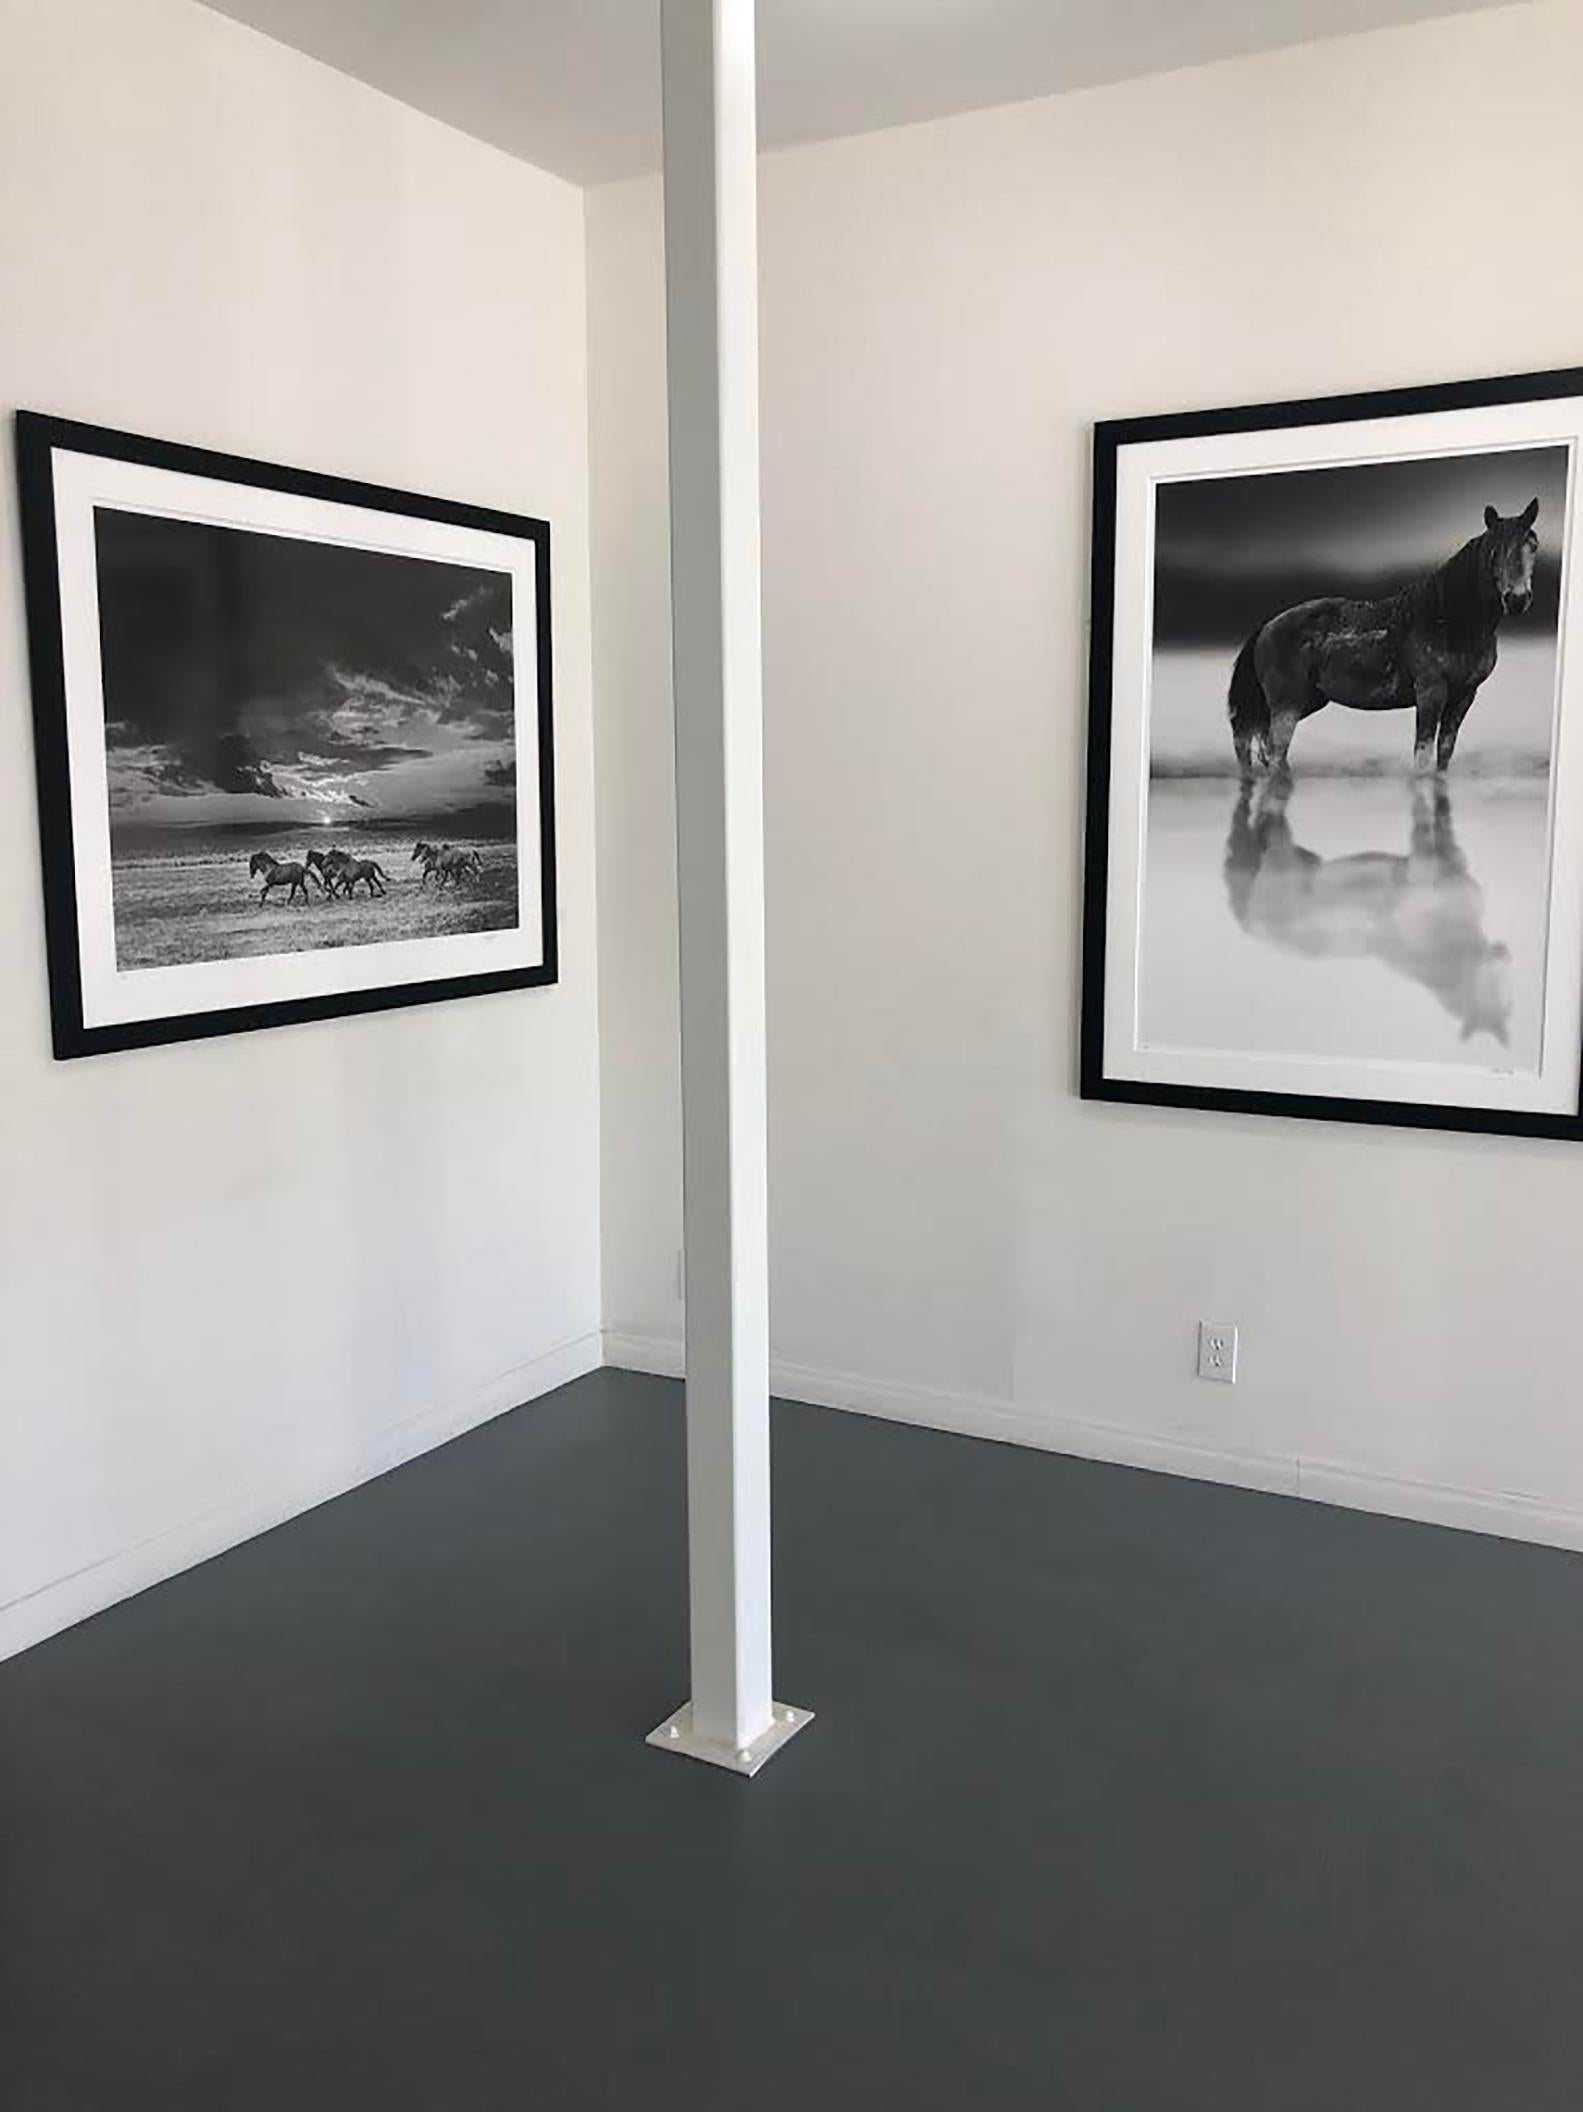 Chasing the Light- 60x40 Black & White Photography Wild Horses Mustangs Unsigned - Print by Shane Russeck